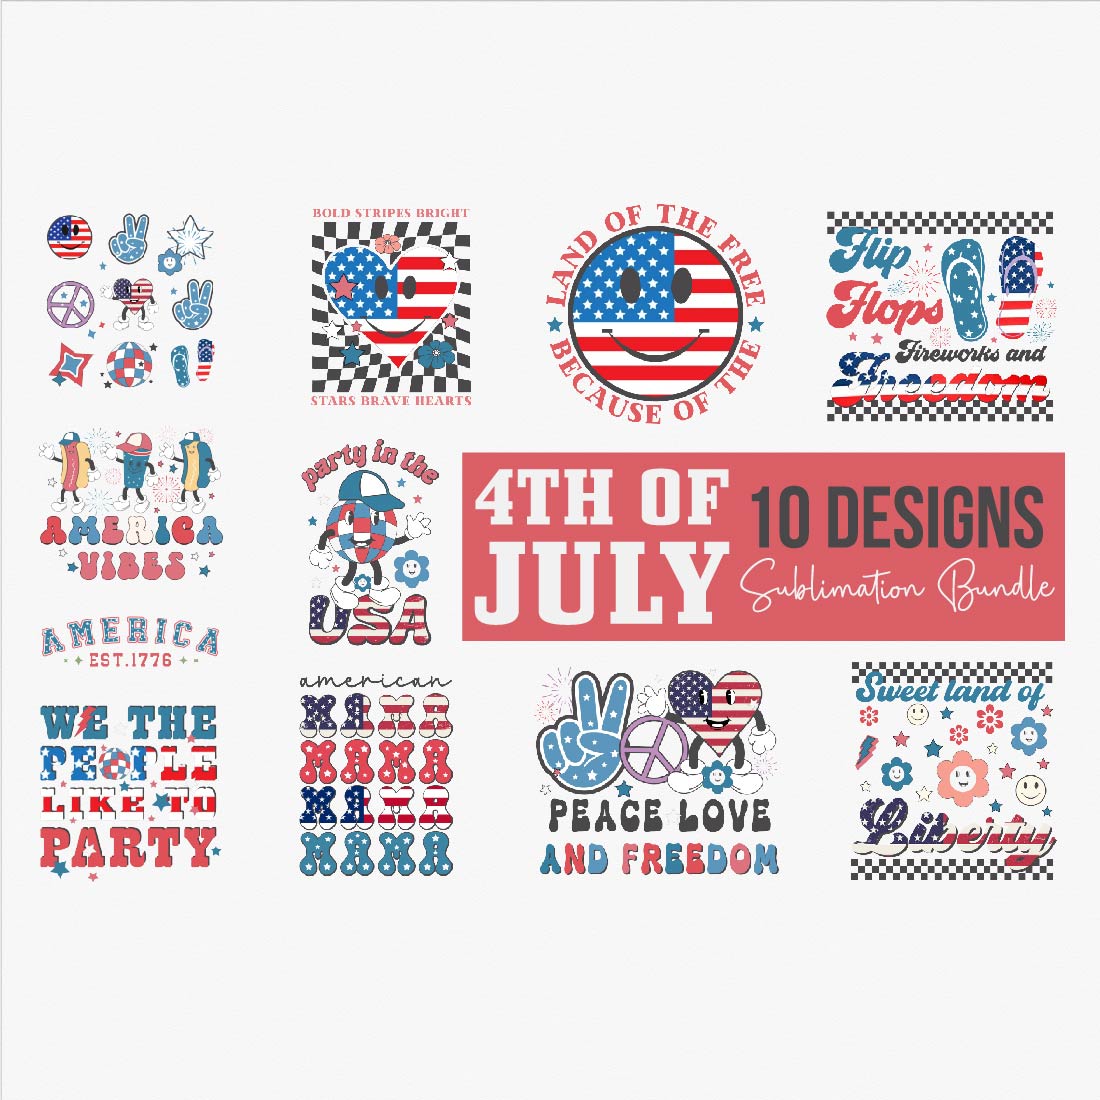 4th Of July Sublimation Bundle cover image.